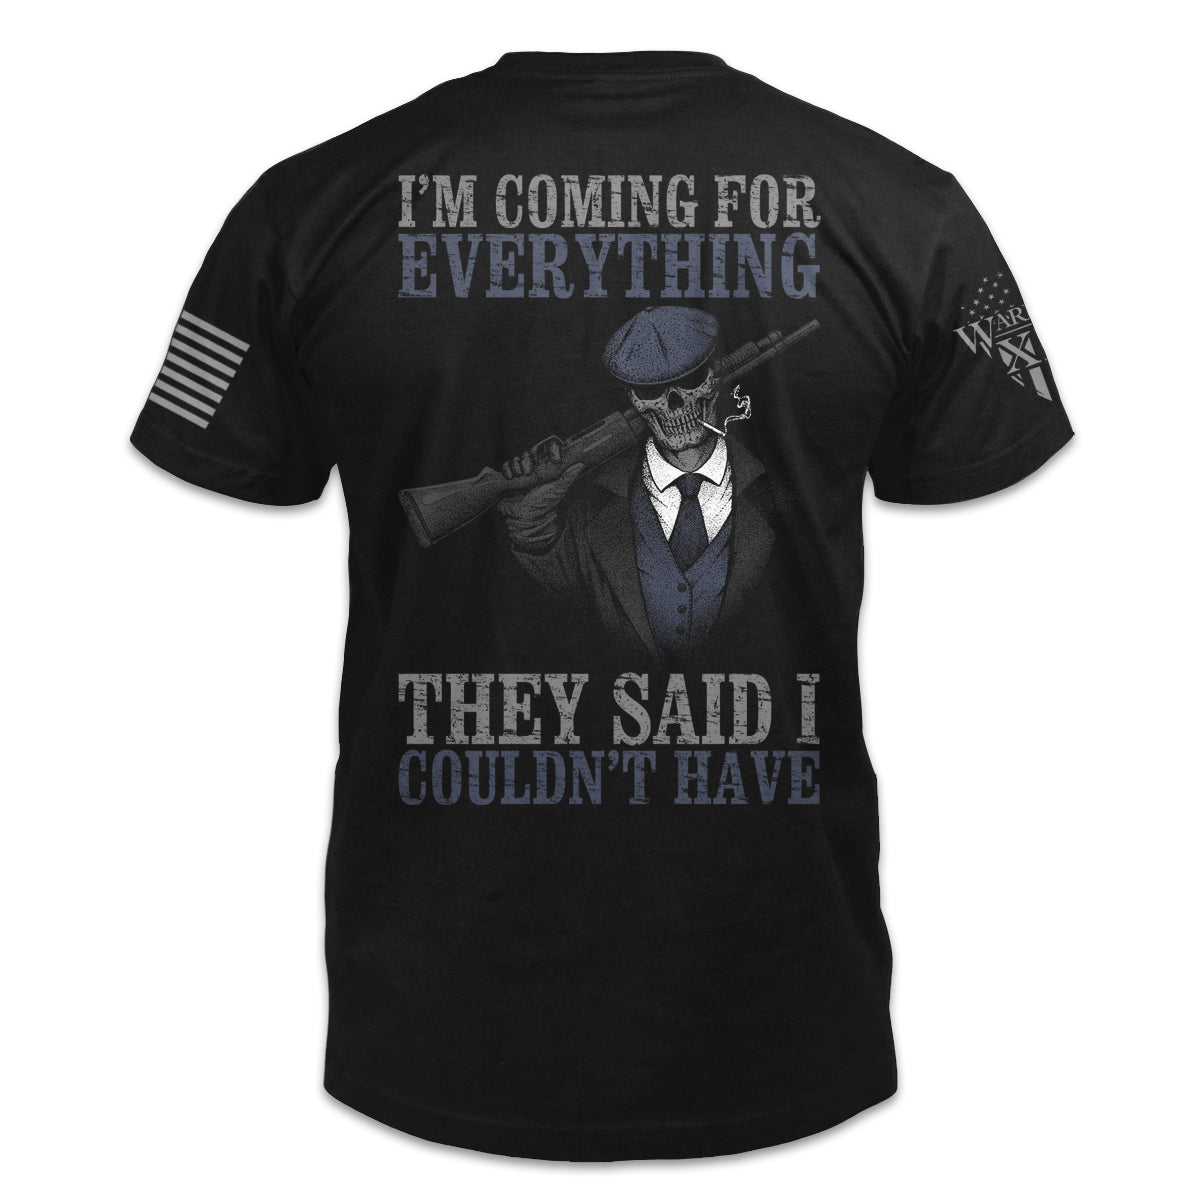 A black t-shirt with the words "I'm coming for everything they said I couldn't have" with a peeky blinders figure holding a gun printed on the back.